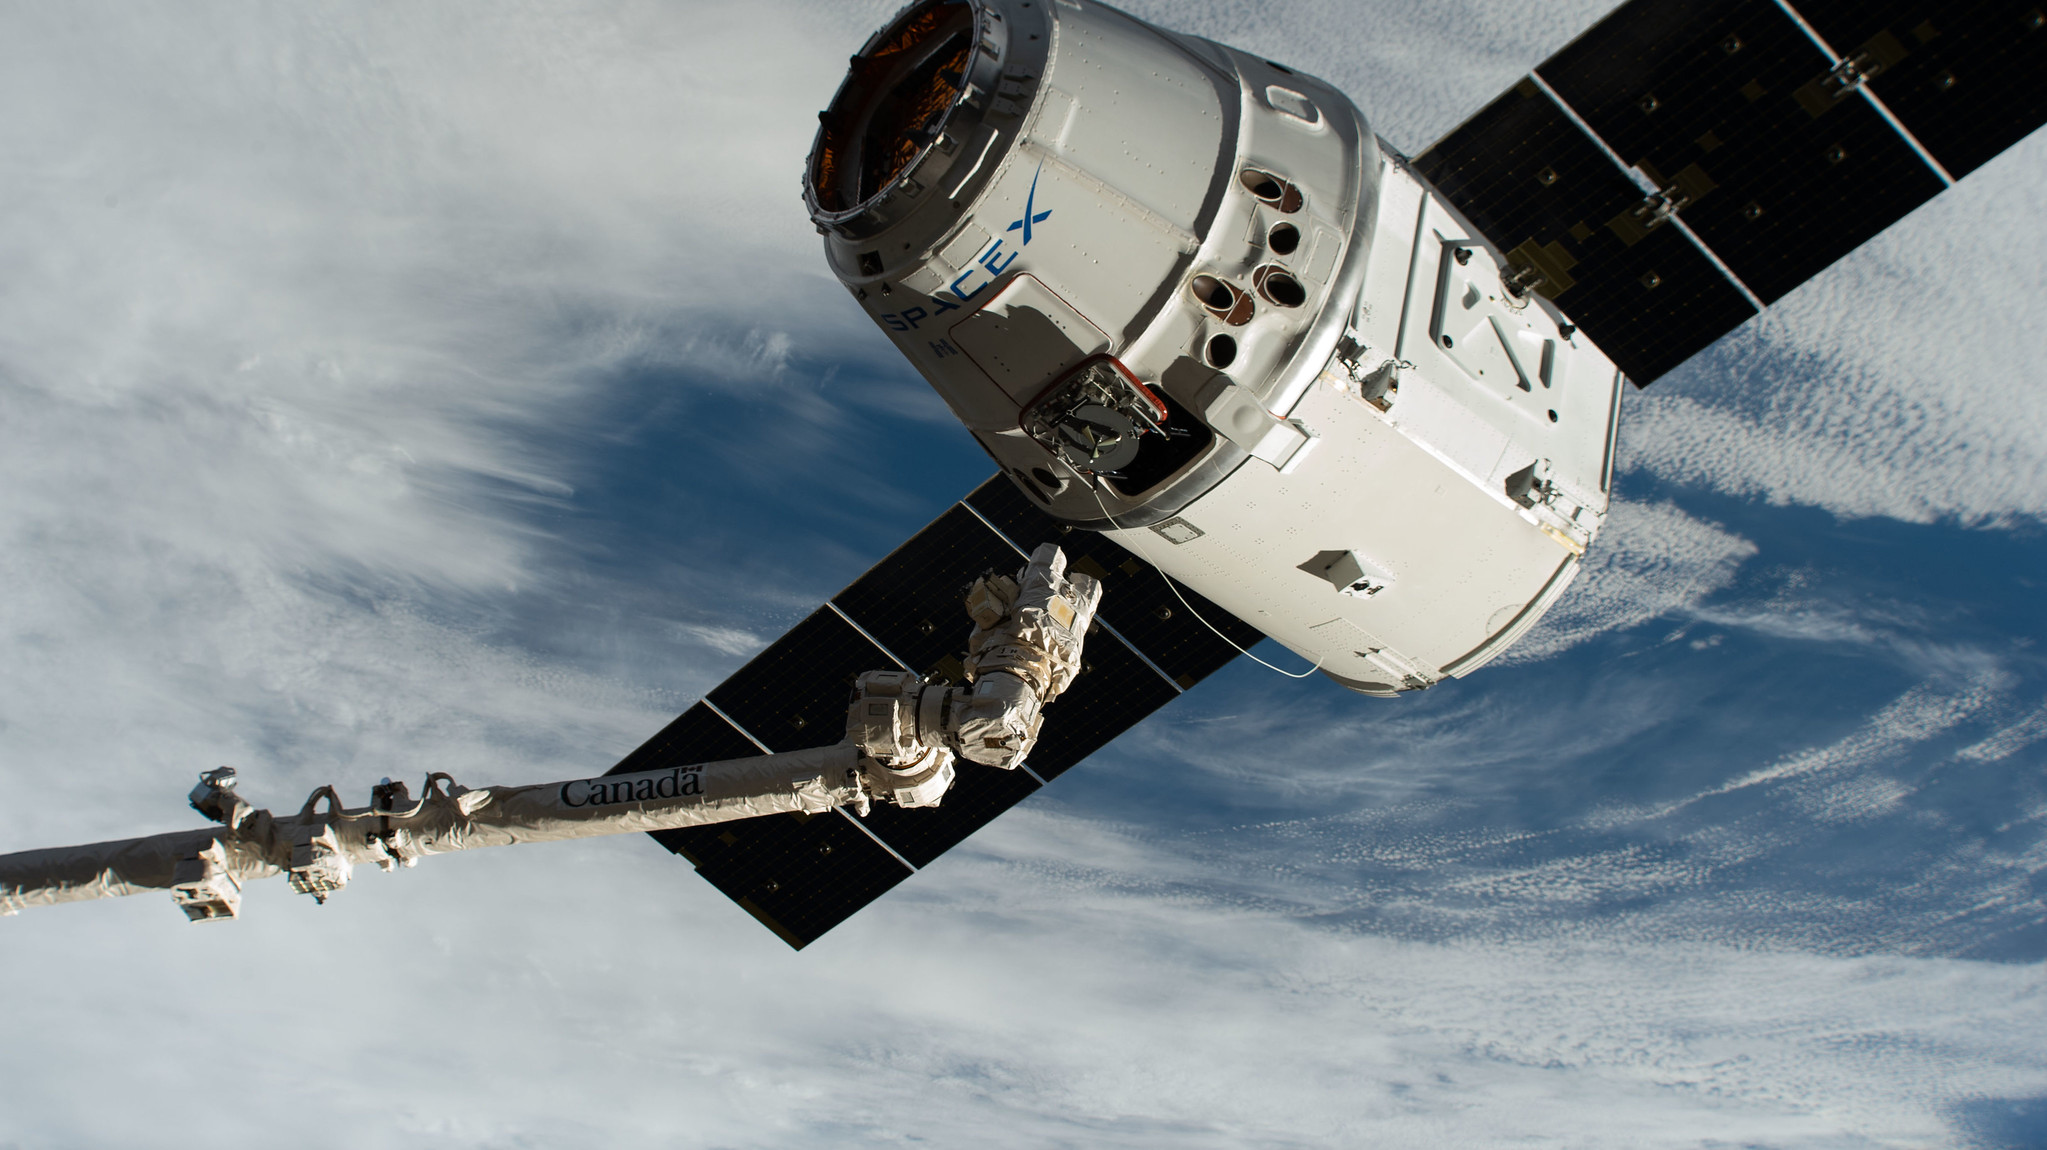 The Canadarm2 robotic arm, commanded by astronaut David Saint-Jacques, reaches out to grapple the SpaceX Dragon cargo craft